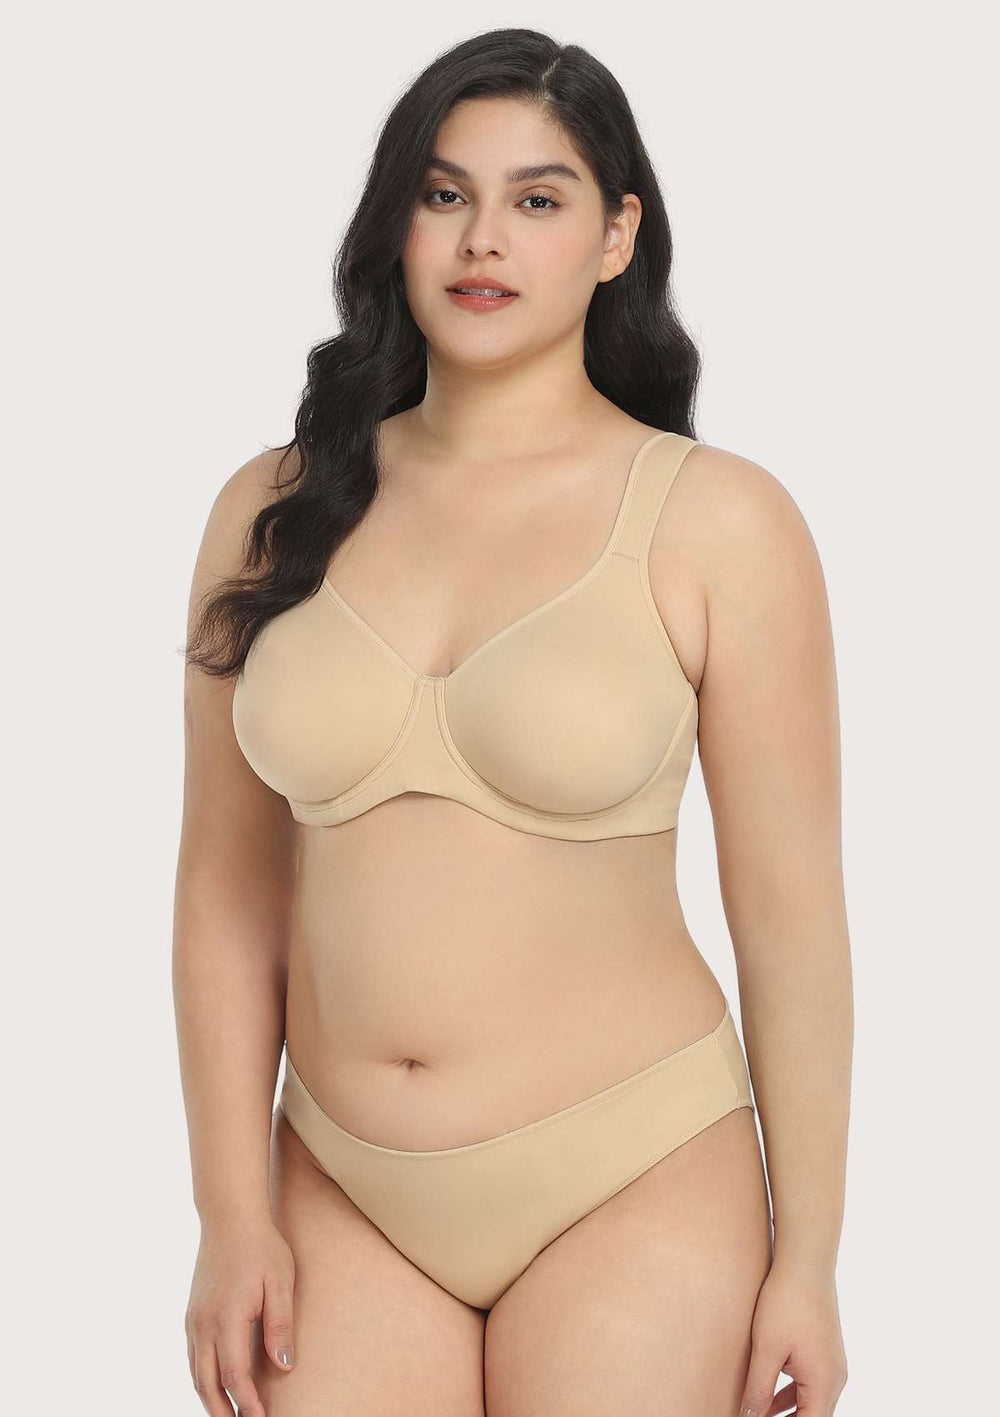 Van Heusen Intimates Bras, Women Non Padded High Stretch Cotton Minimizer  Bra - Wireless And Double Lined Cups for Women at Vanh